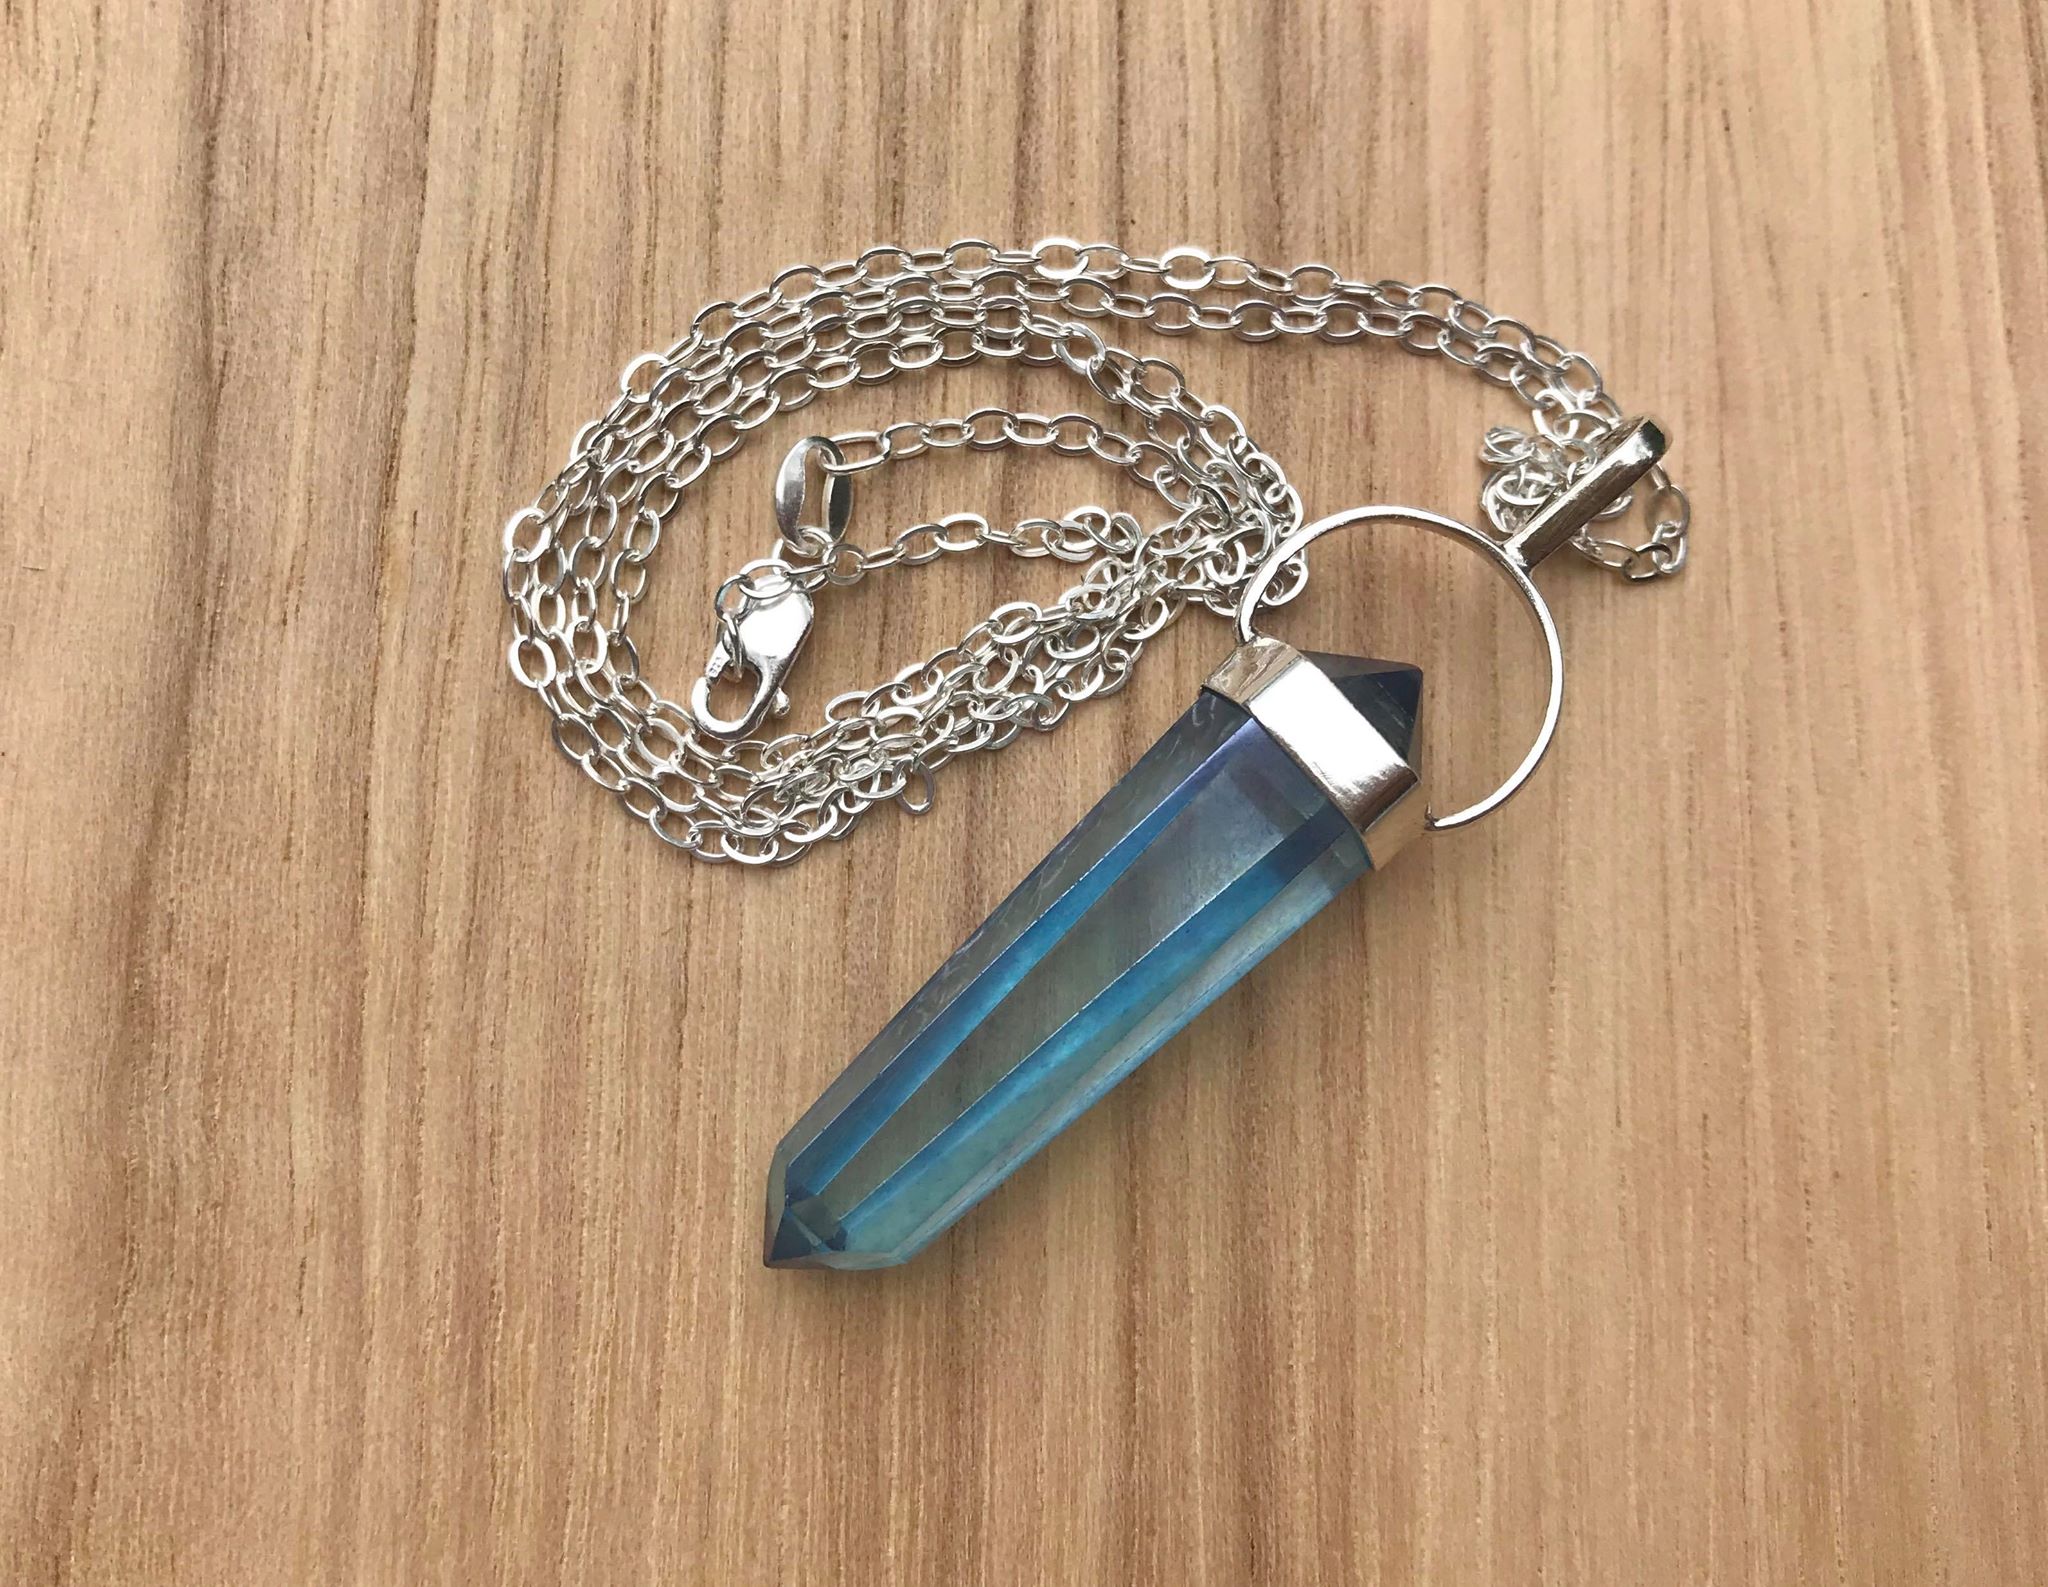 Aqua Aura Quartz? Is this dyed? I can't tell if I was bamboozled or not lol  : r/MineralGore